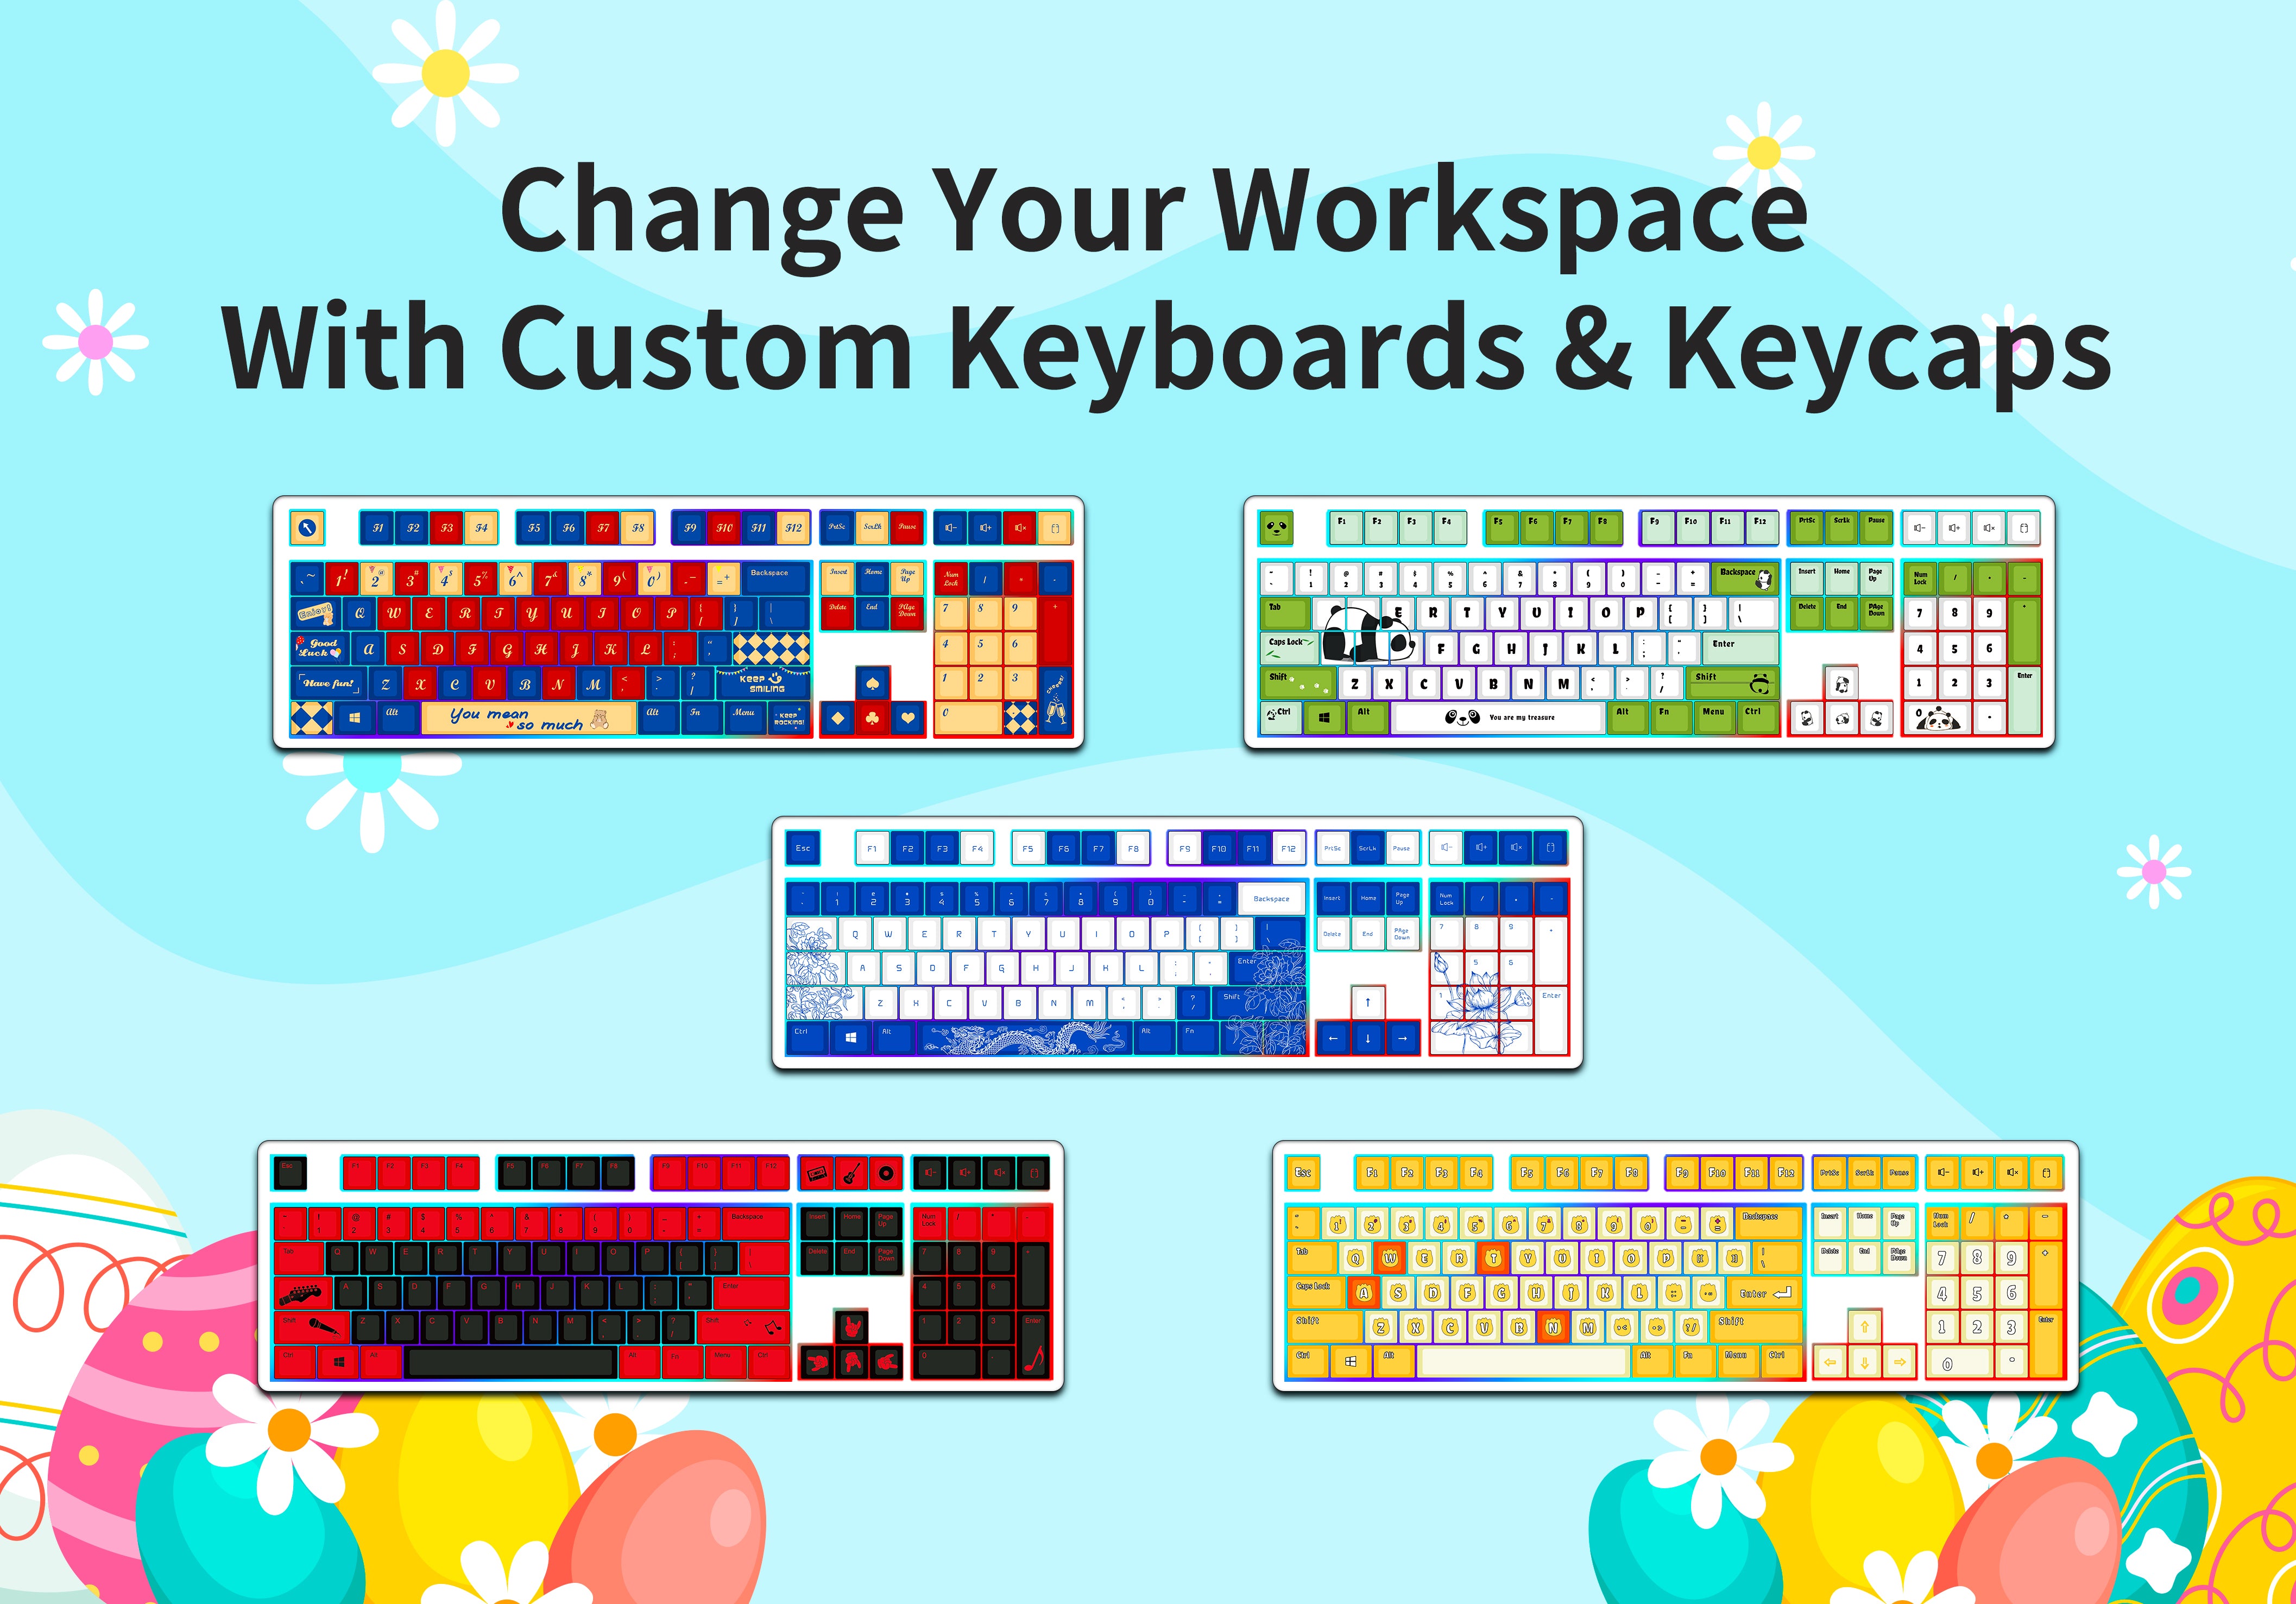 change your workspace with custom keyboards & keycaps